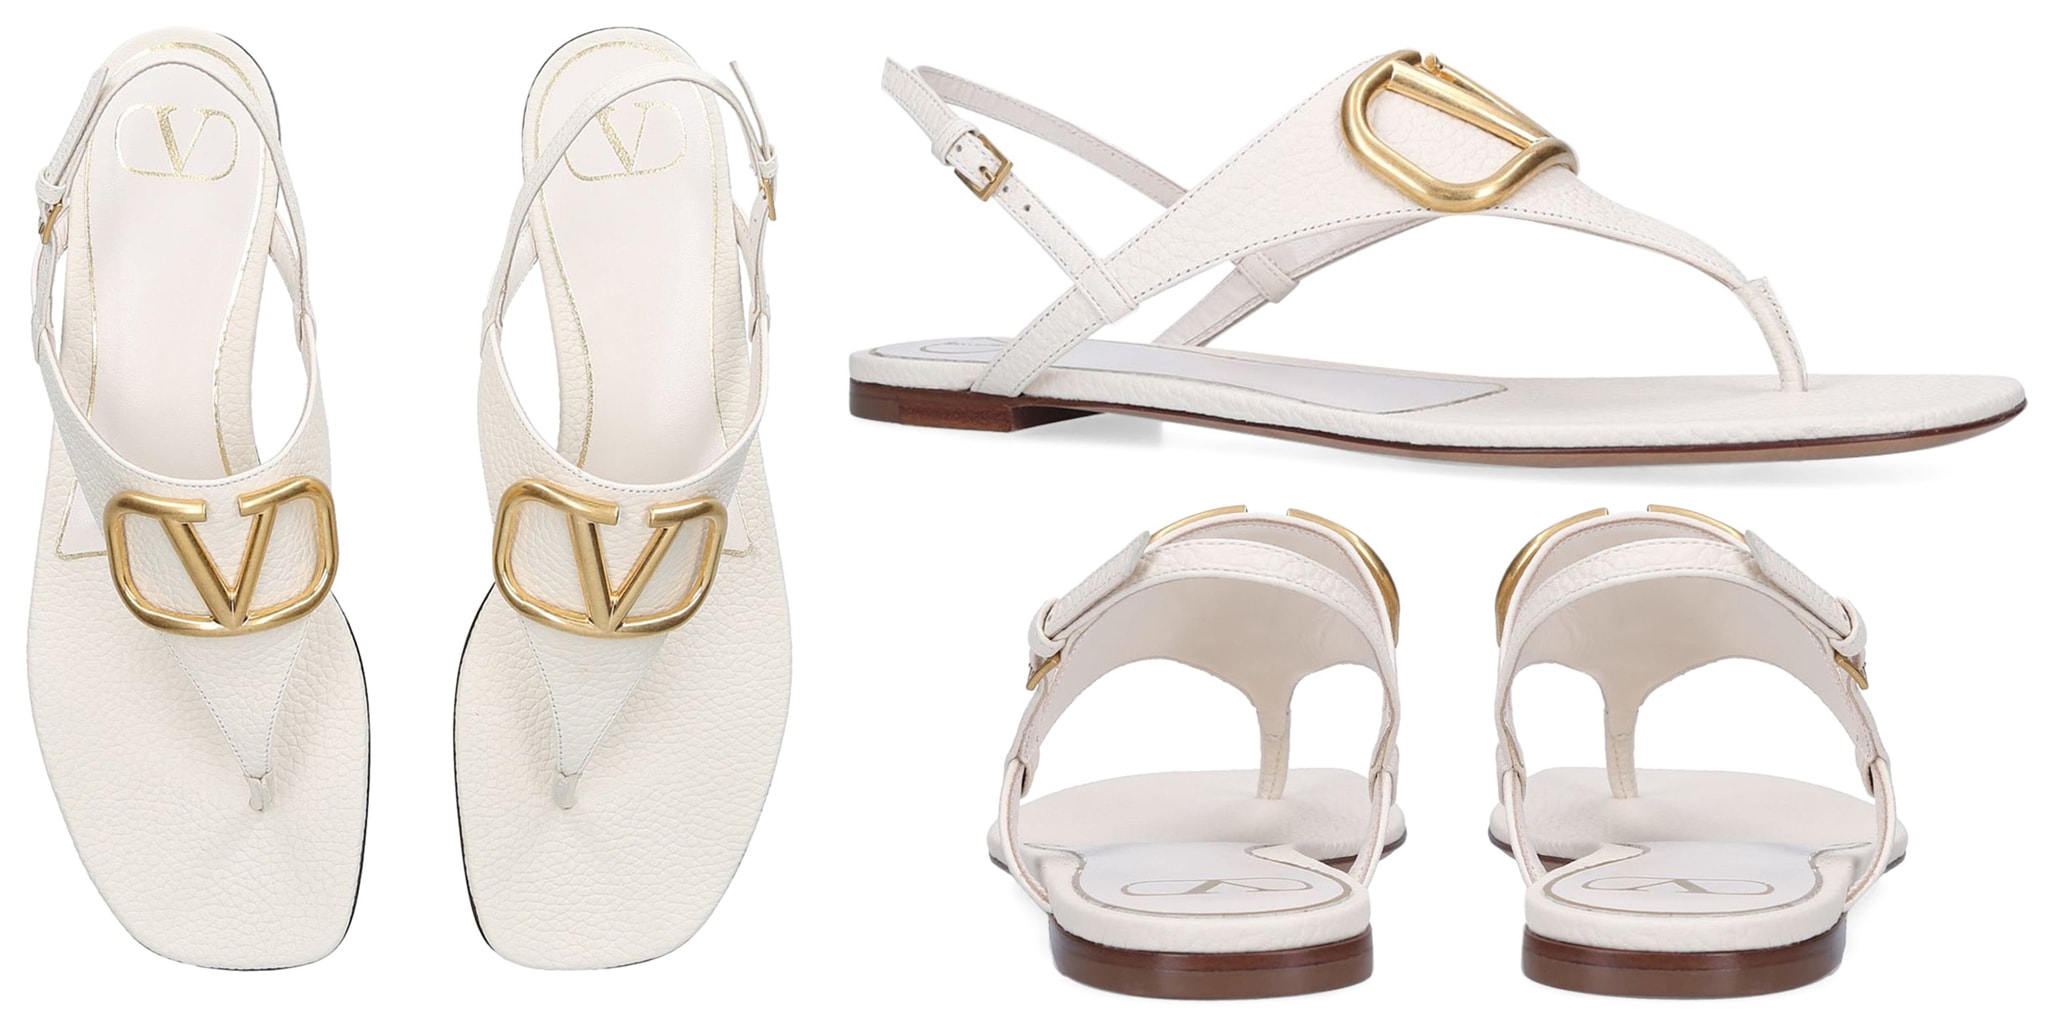 Inject sophisticated appeal to your summer outfit with the Valentino Vlogo sandals